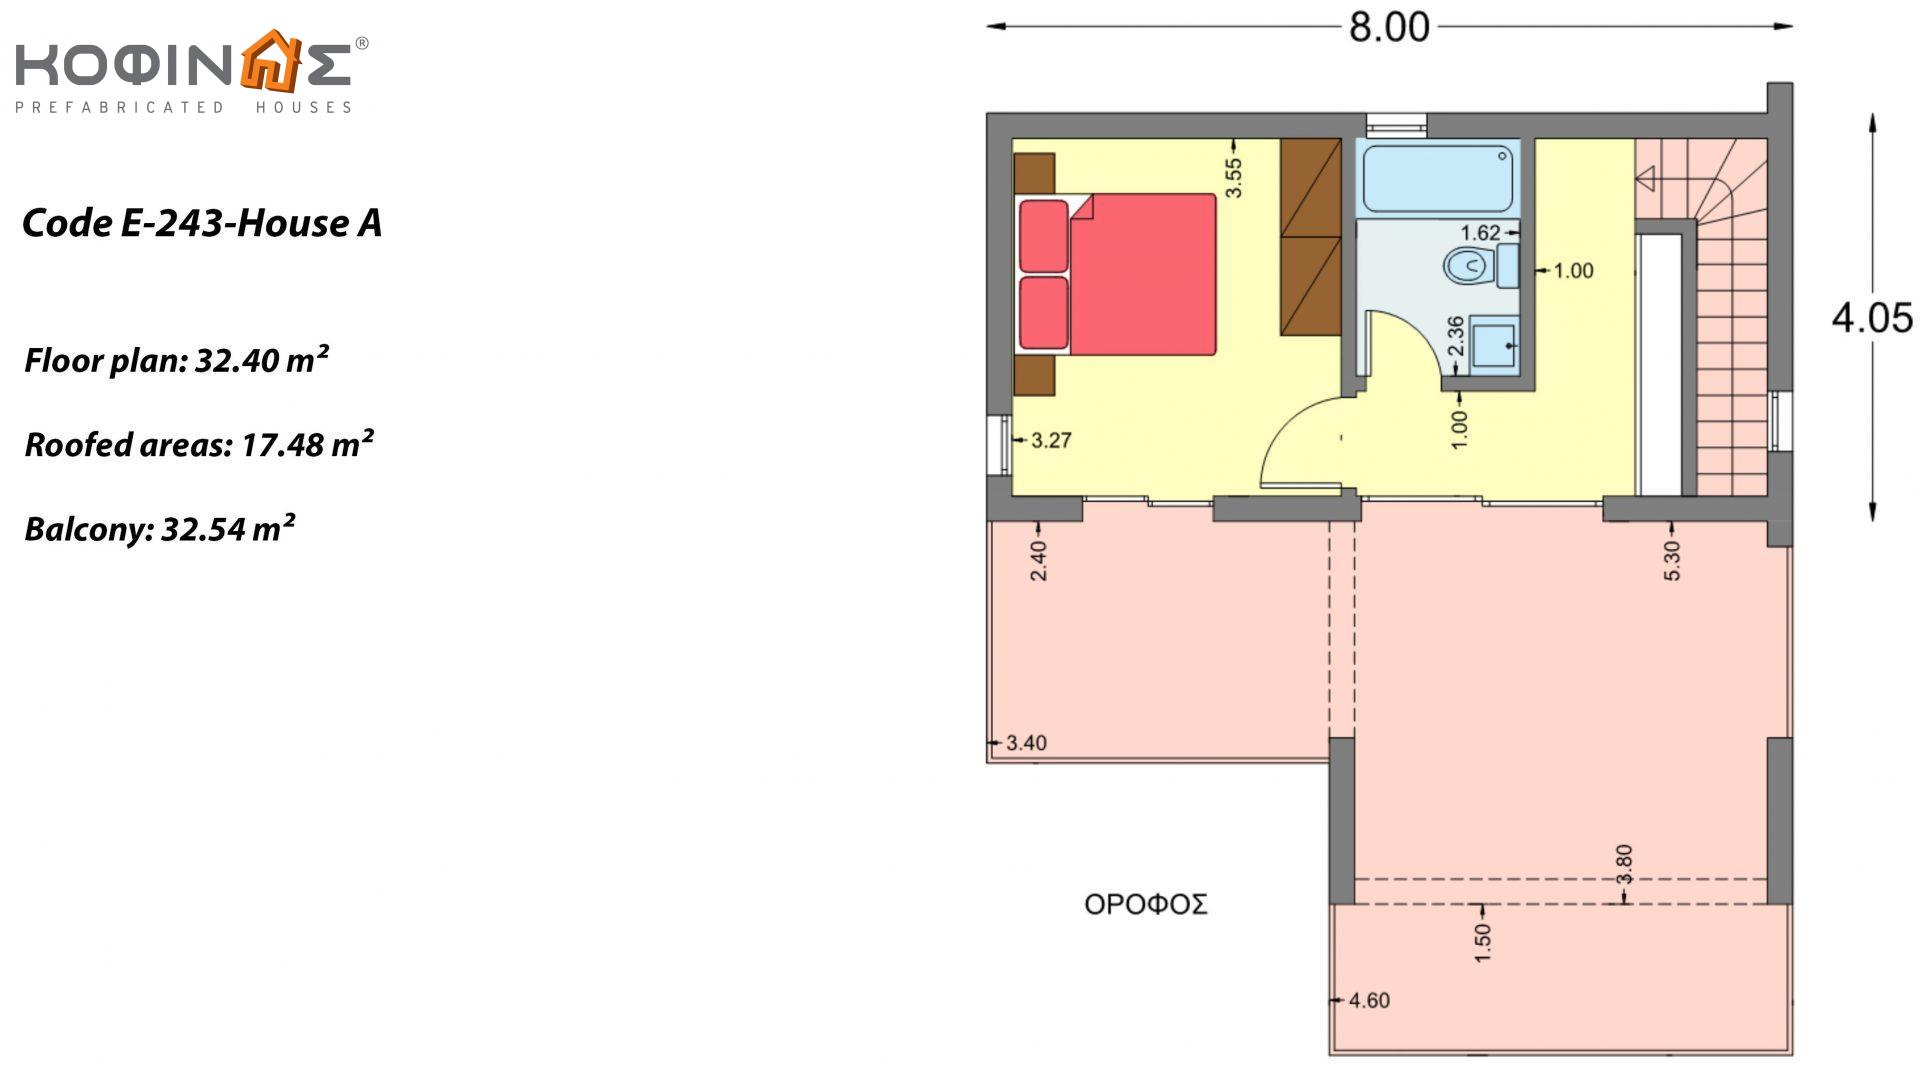 Complex of 2-story + 1 story houses E-243, total surface of (90.42+75.56+77.85)= 243,83 m², covered areas 88.00 m² , balcony(house Α) 32.54 m²